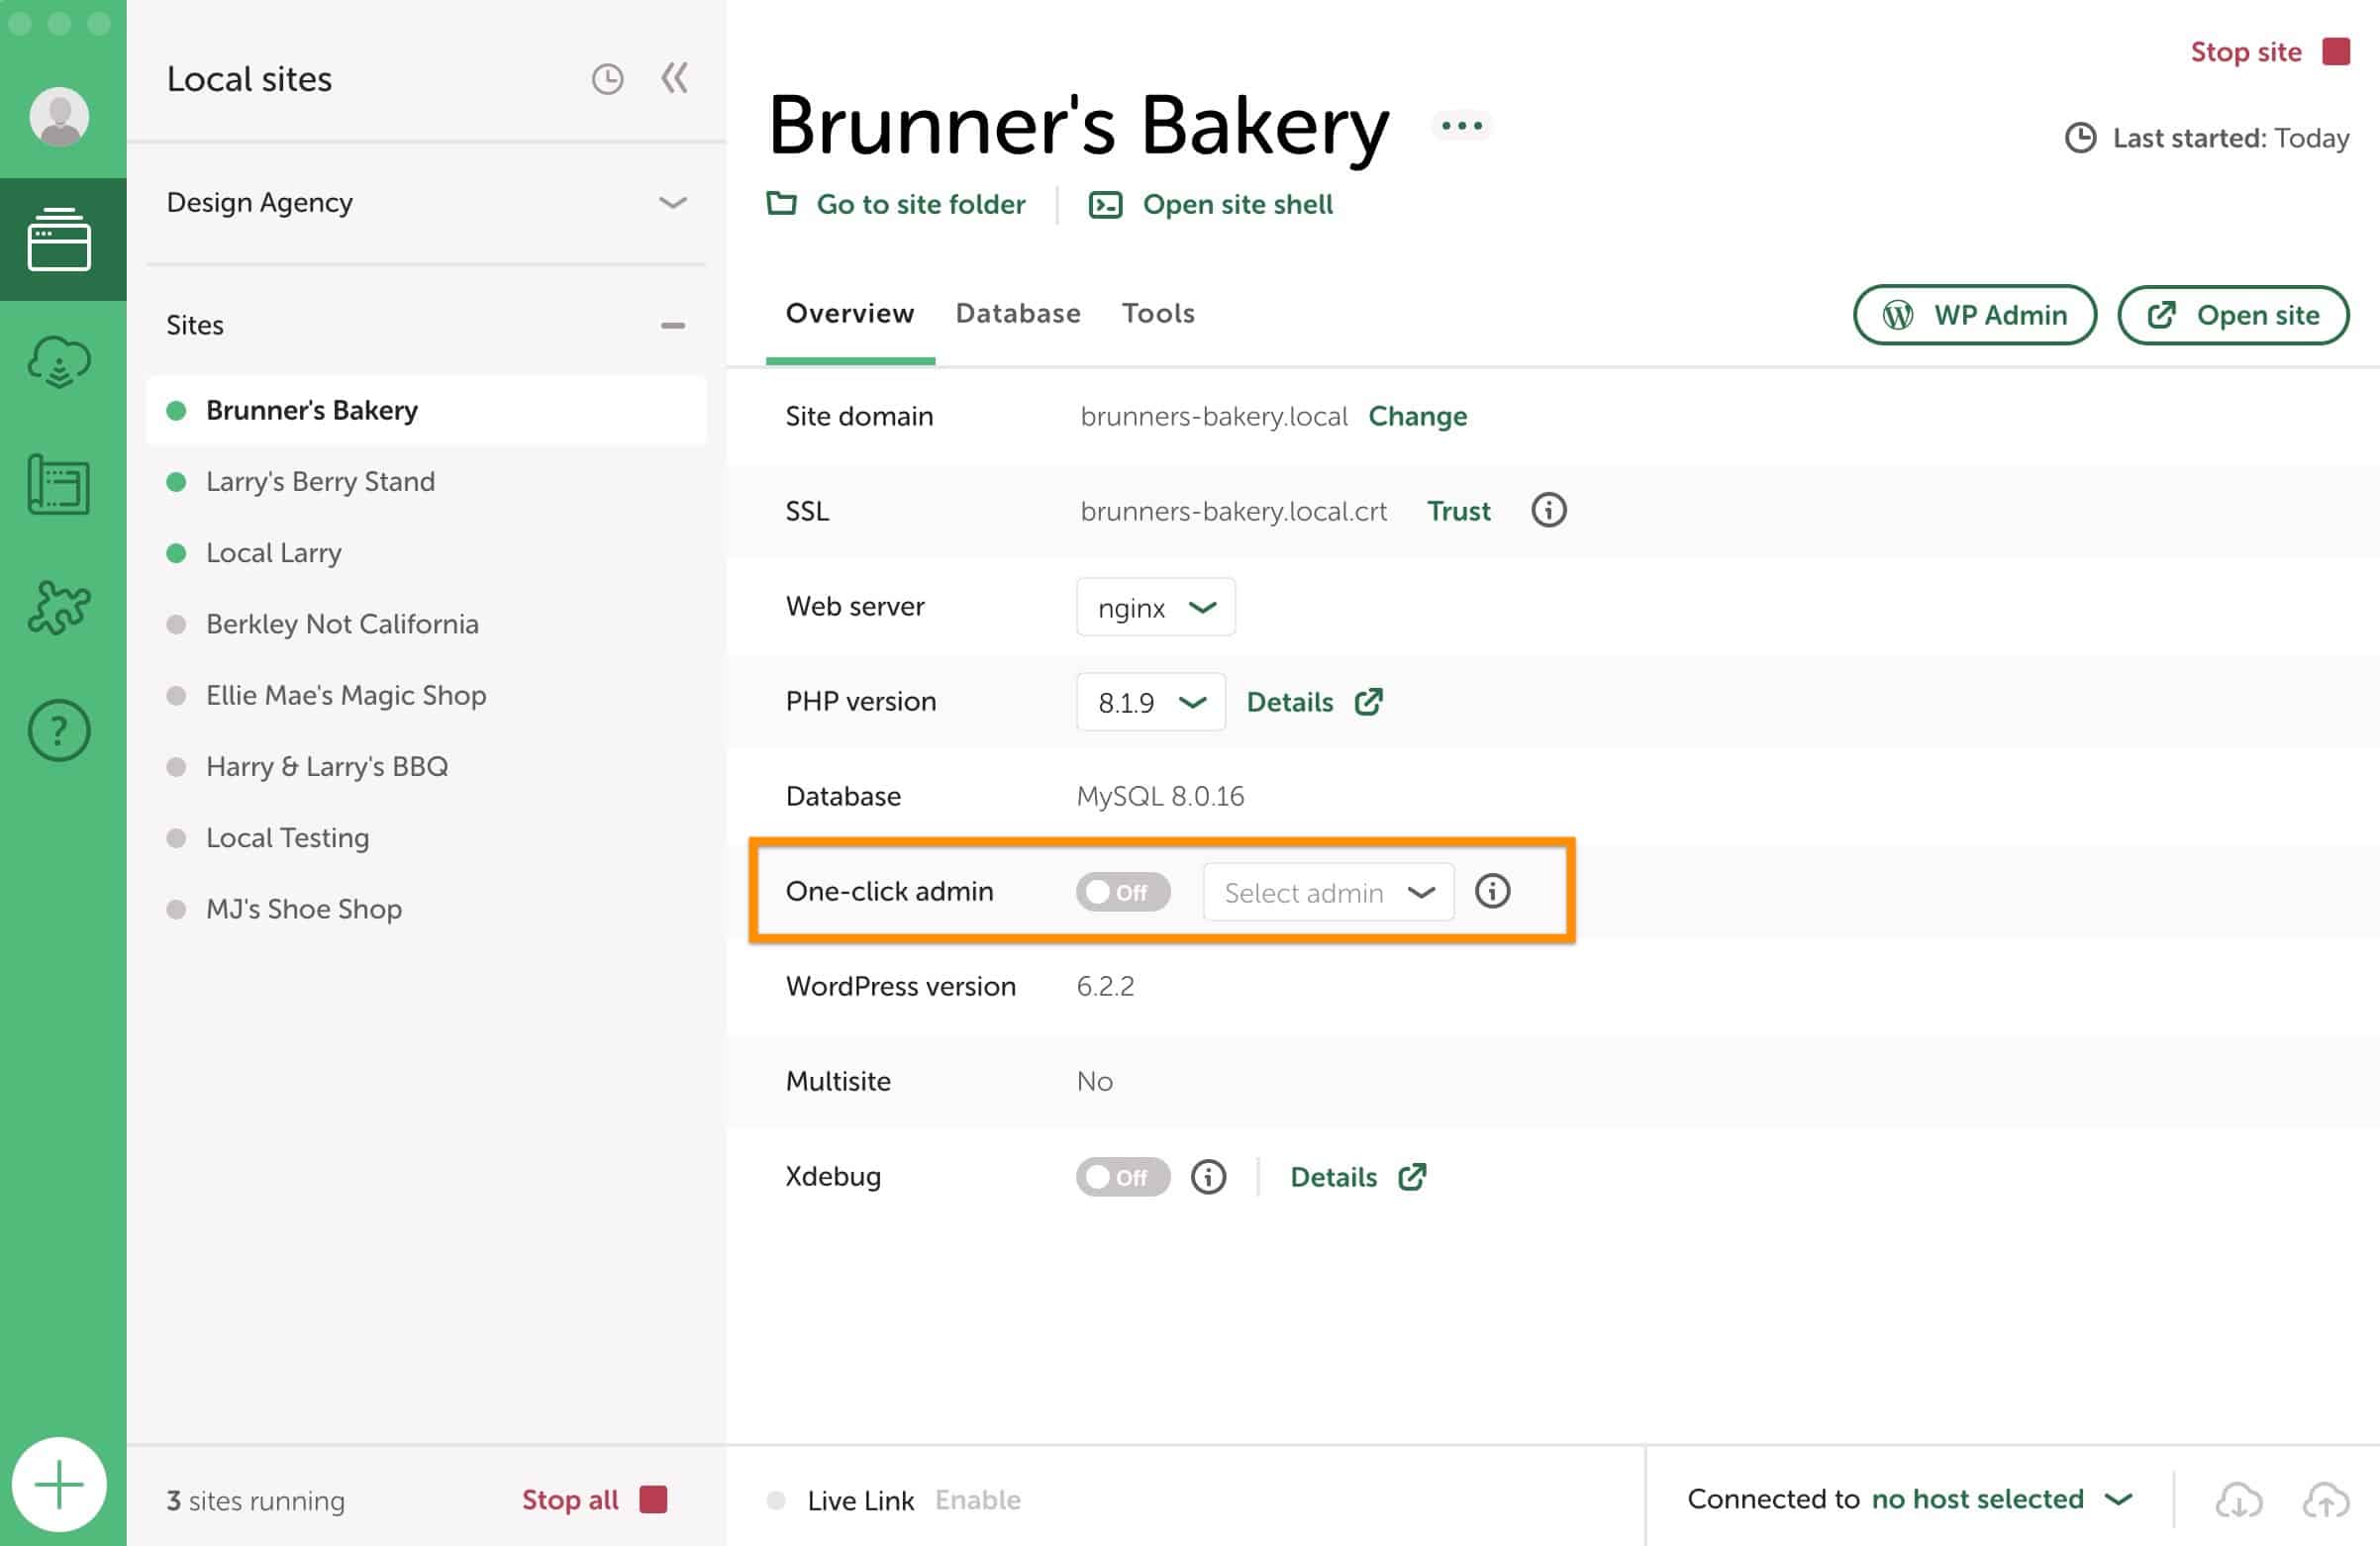 Local's One-click admin feature is currently turned off on the site Brunner's Bakery.